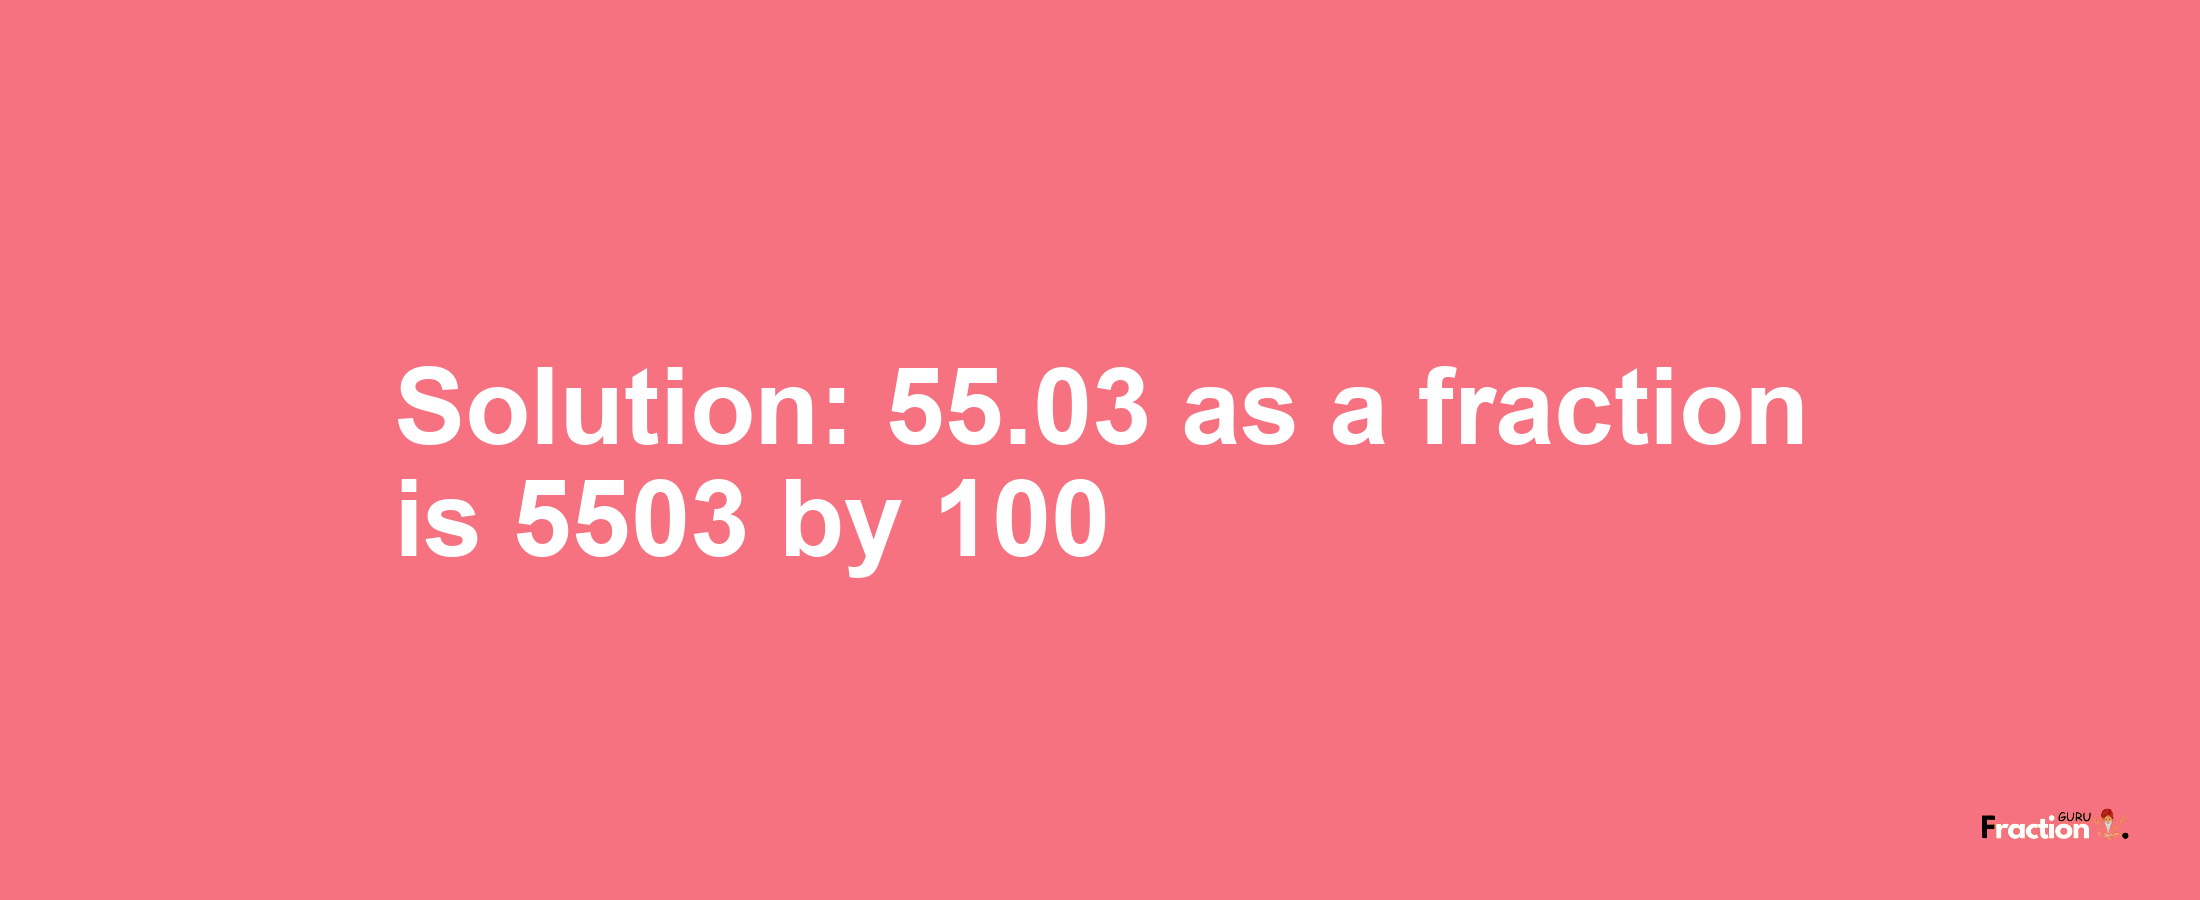 Solution:55.03 as a fraction is 5503/100